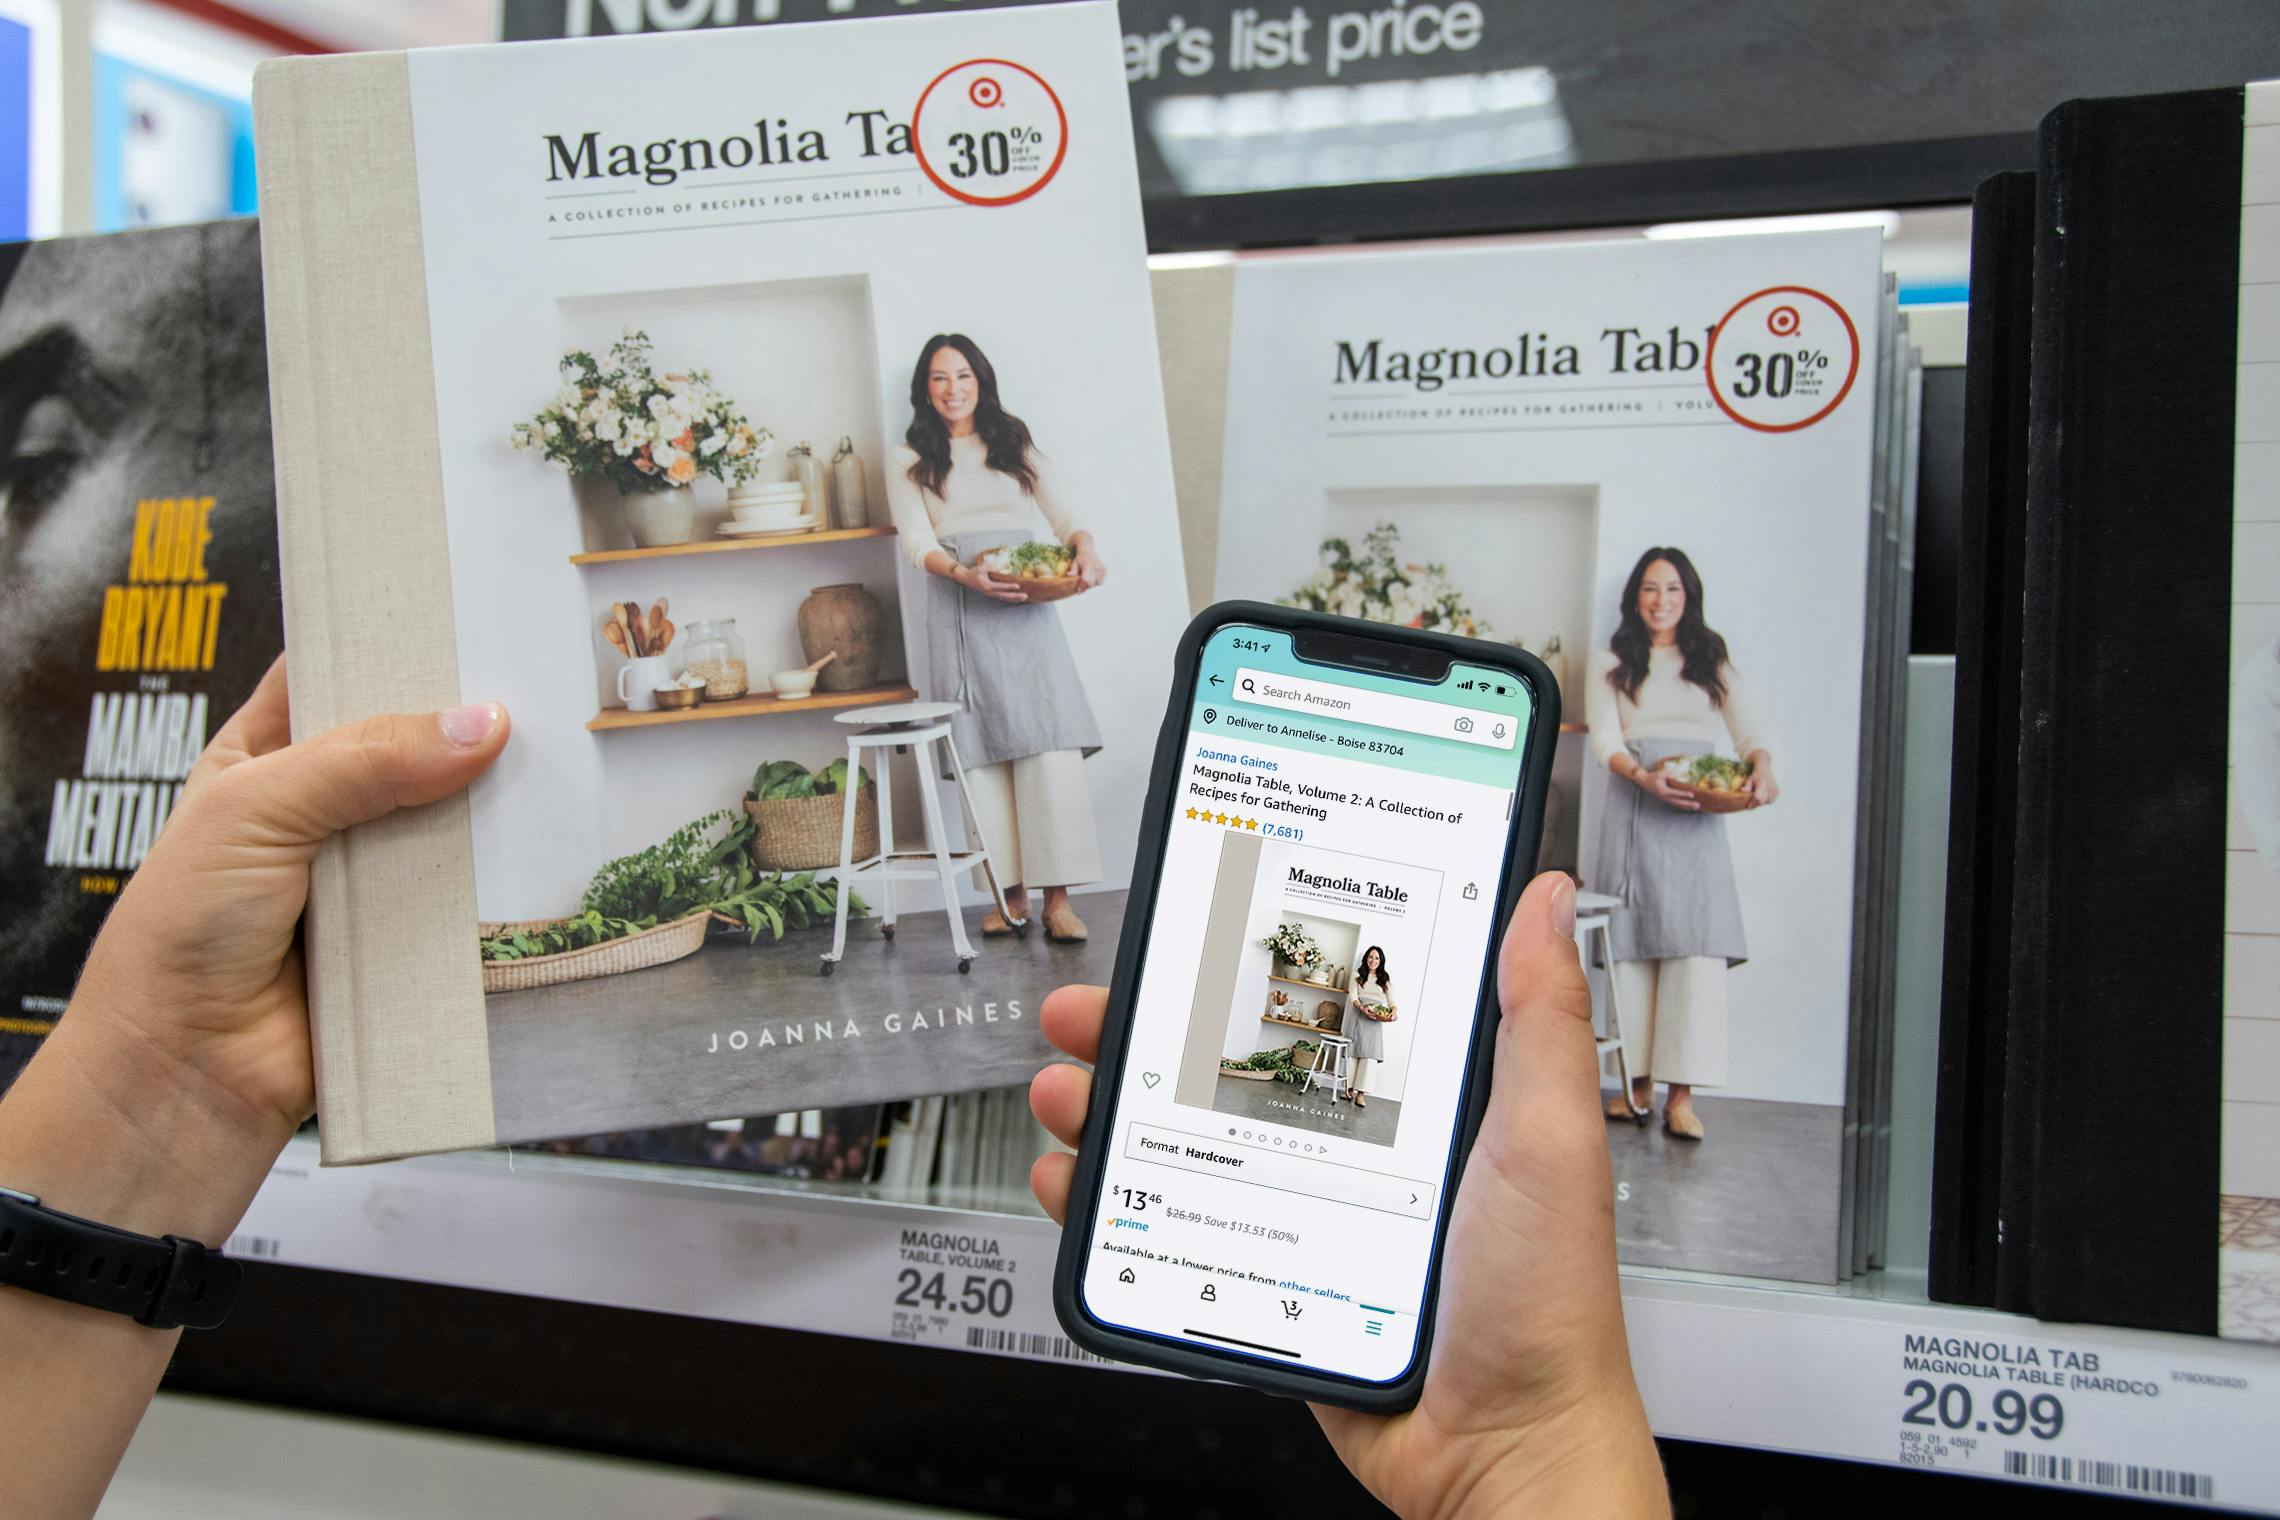 A person holding a copy of Magnolia Table next to a cell phone displaying a lower price for the book on the Amazon app.